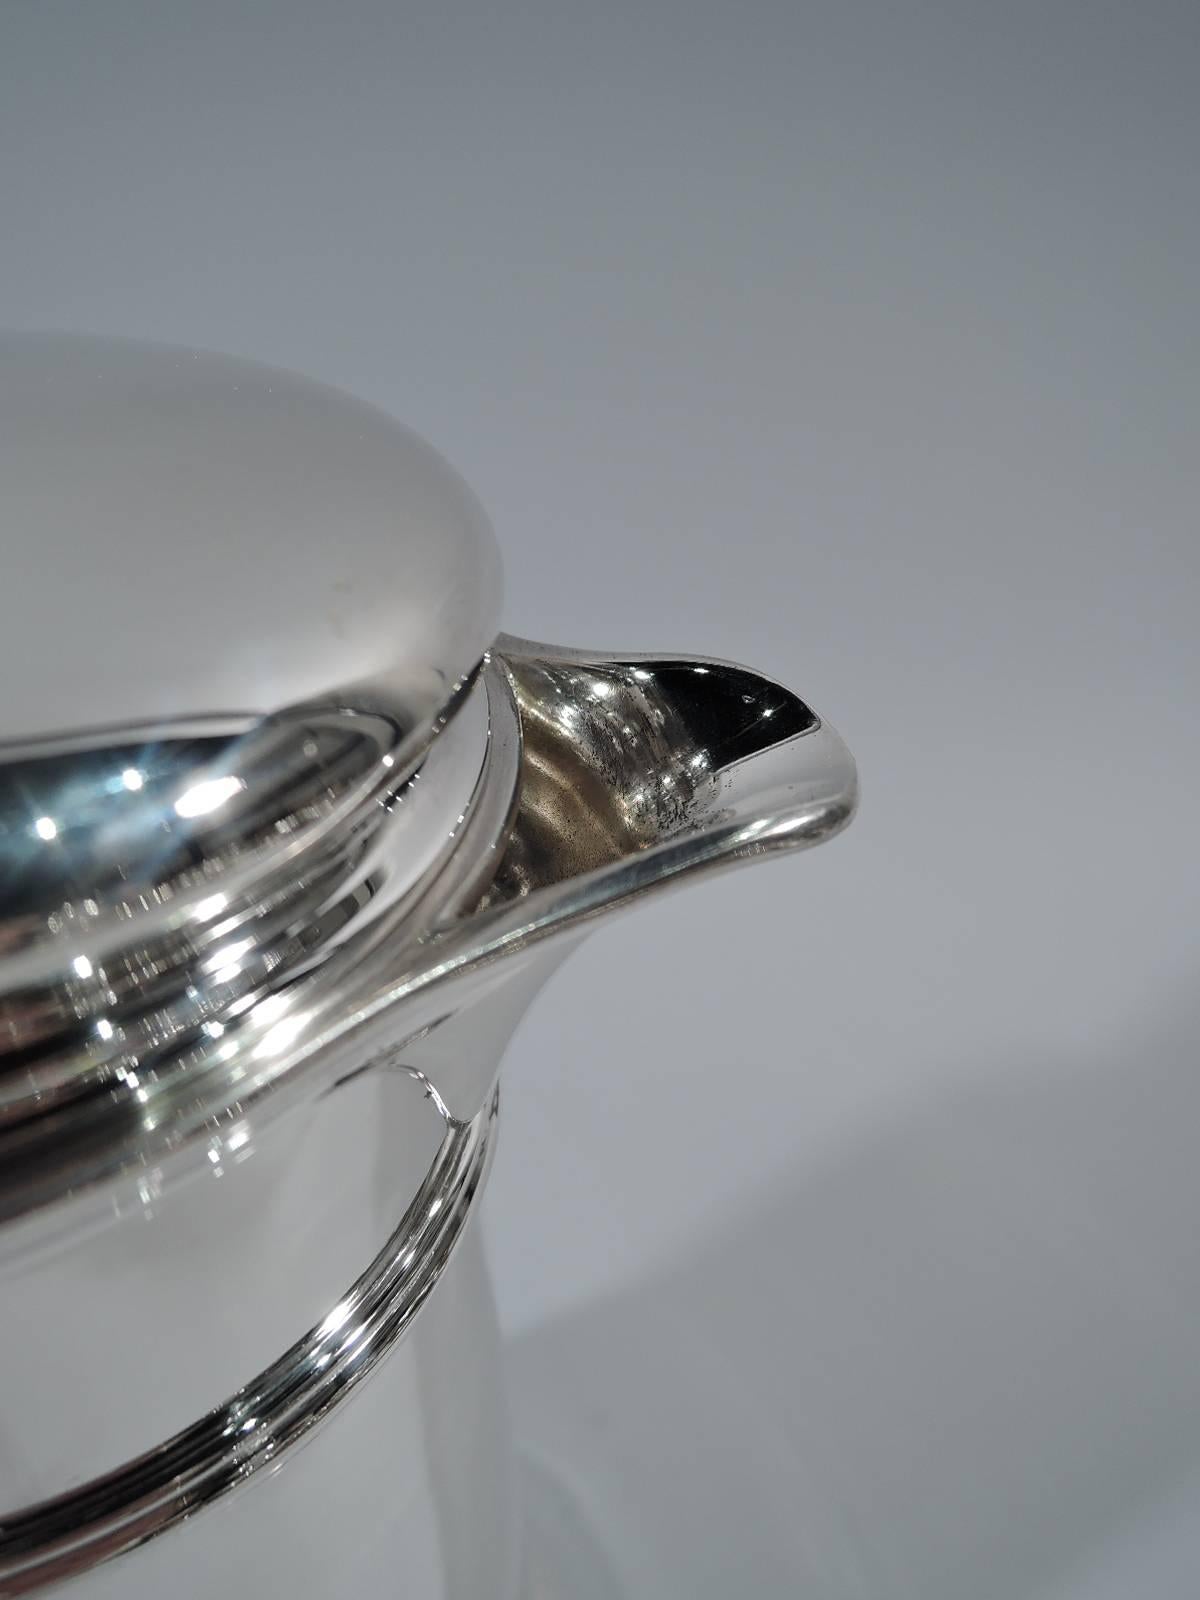 Art Deco sterling silver cocktail shaker. Made by Tiffany & Co. in New York, circa 1931. Conical with scroll bracket handle and v-spout. Bun cover with built-in strainer. Molded bands near top and at base. Spare and functional barware. Hallmark